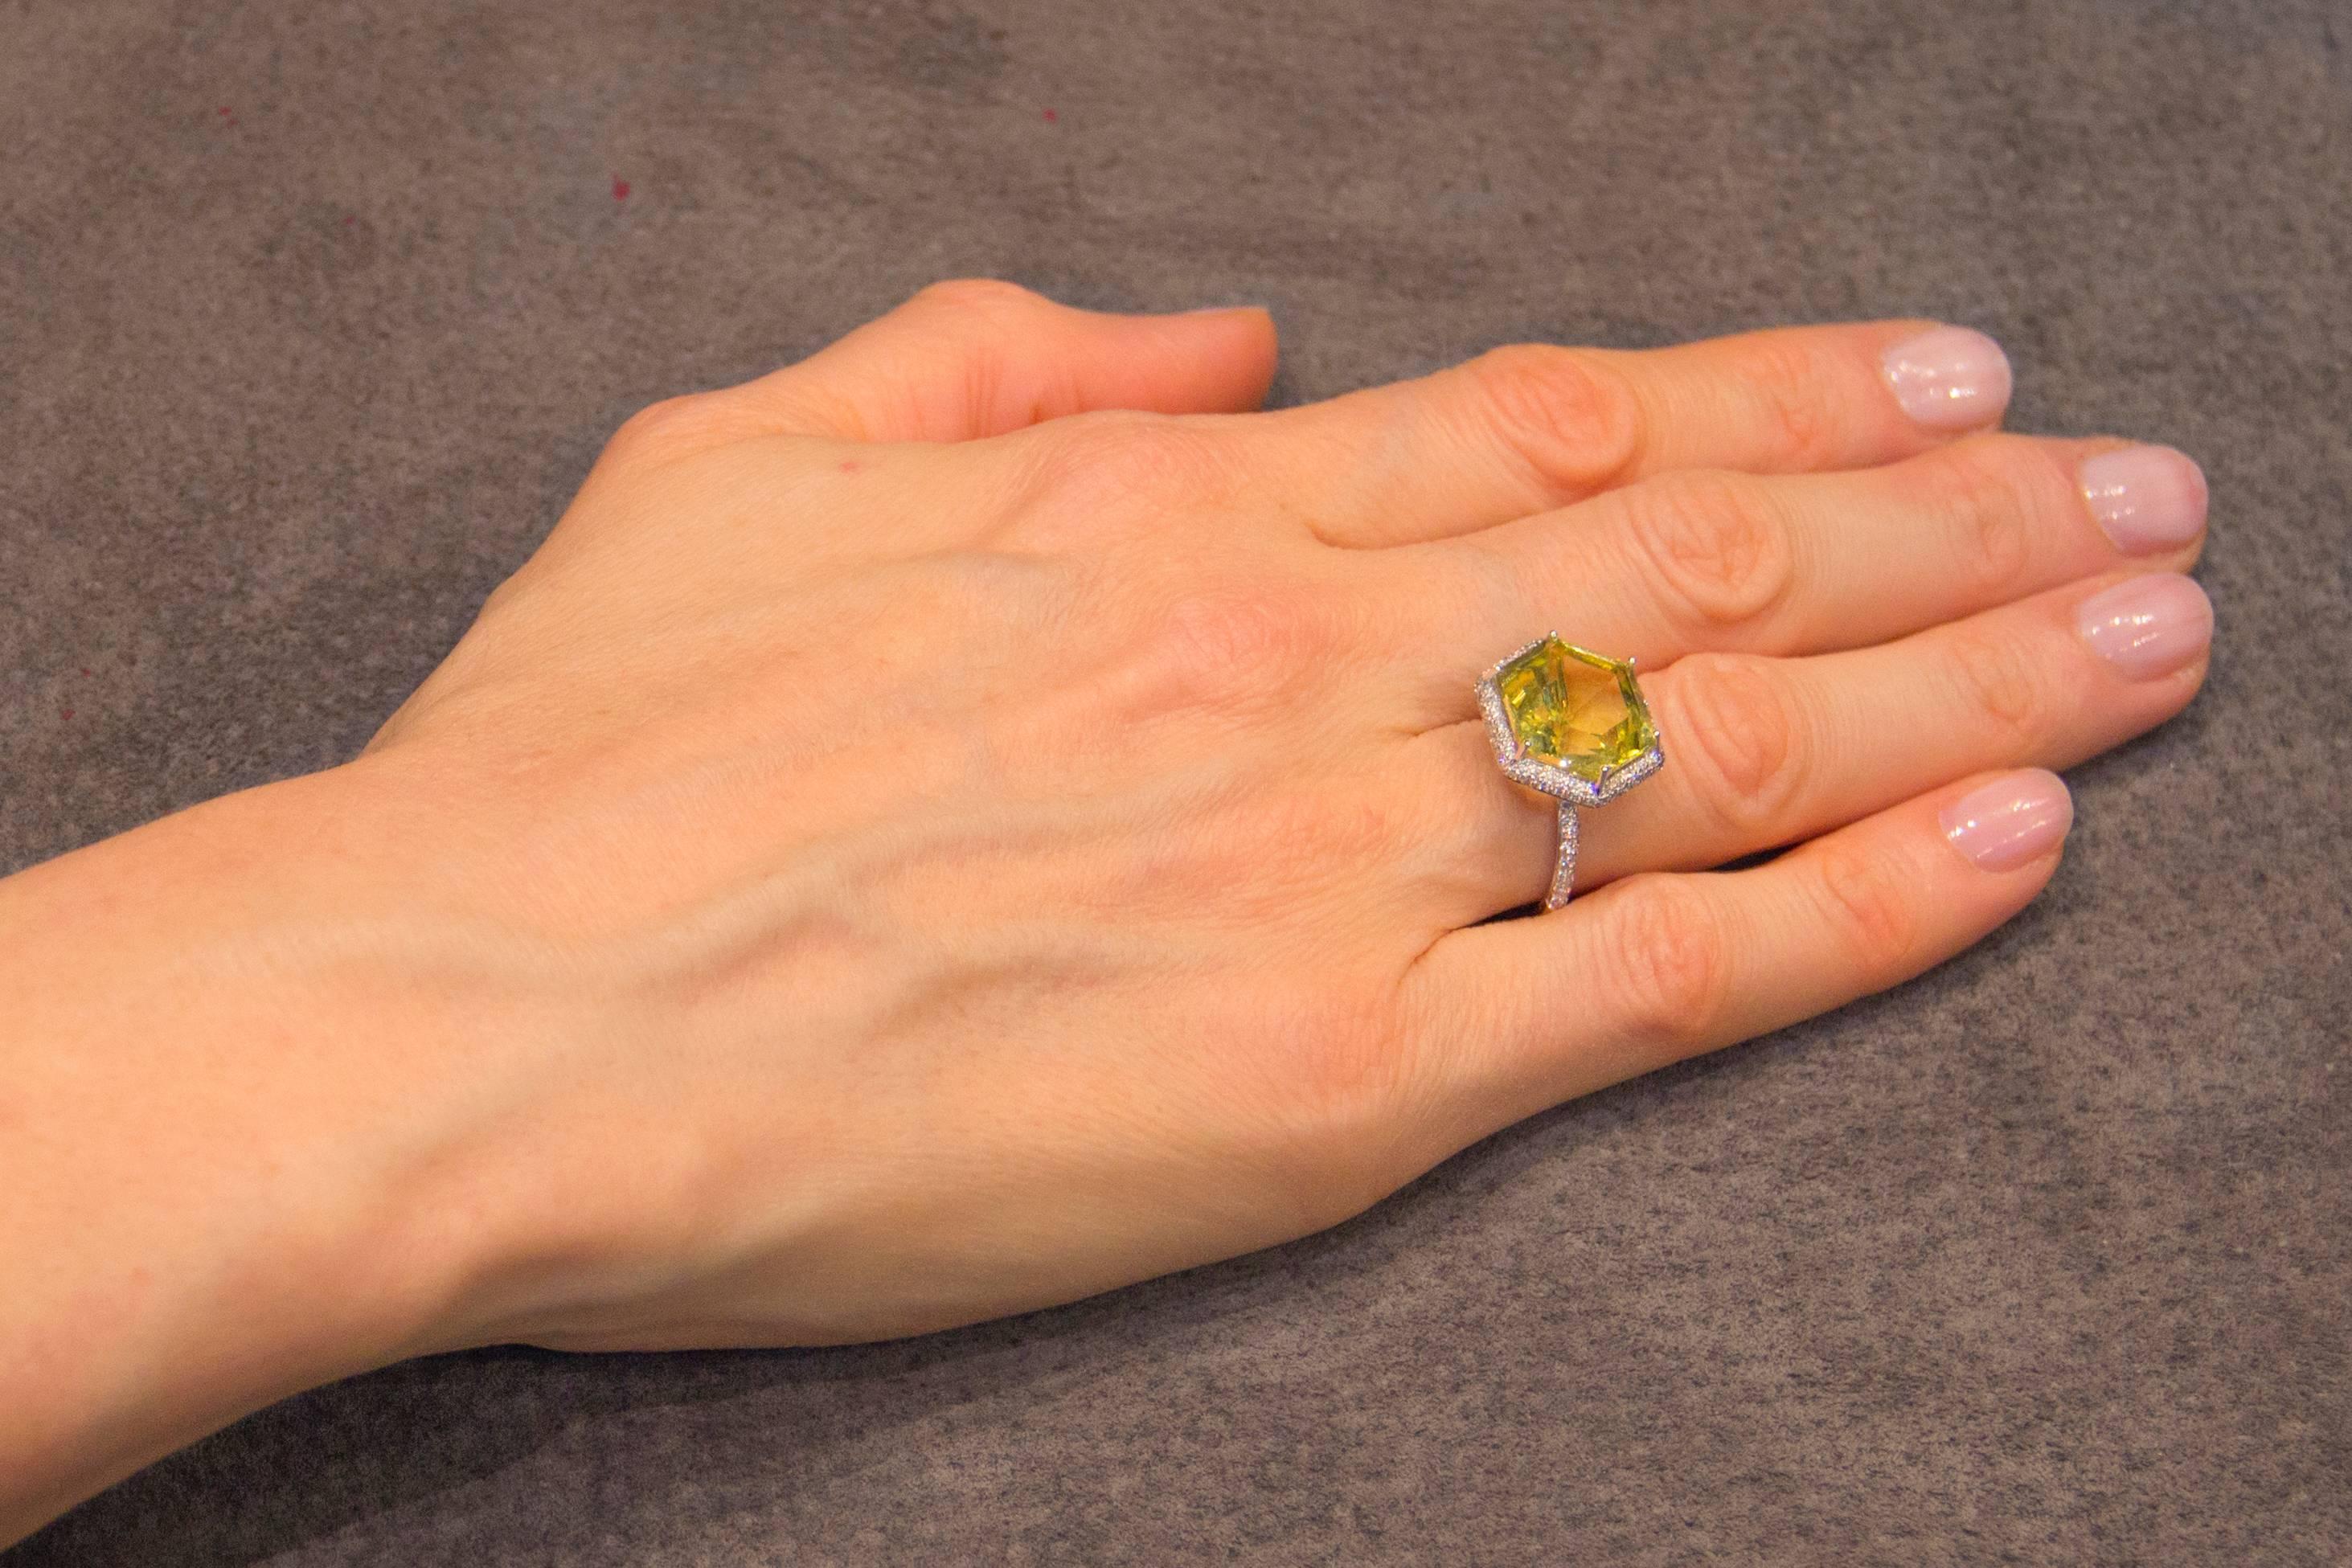 Jona design collection, hand crafted in Italy, 18 karat white gold solitaire ring centering an hexagonal cut citrine weighing 8.72 carats surrounded by a diamond micro pavé halo weighing 0.38 carats. Size US 6.5, can be sized to any